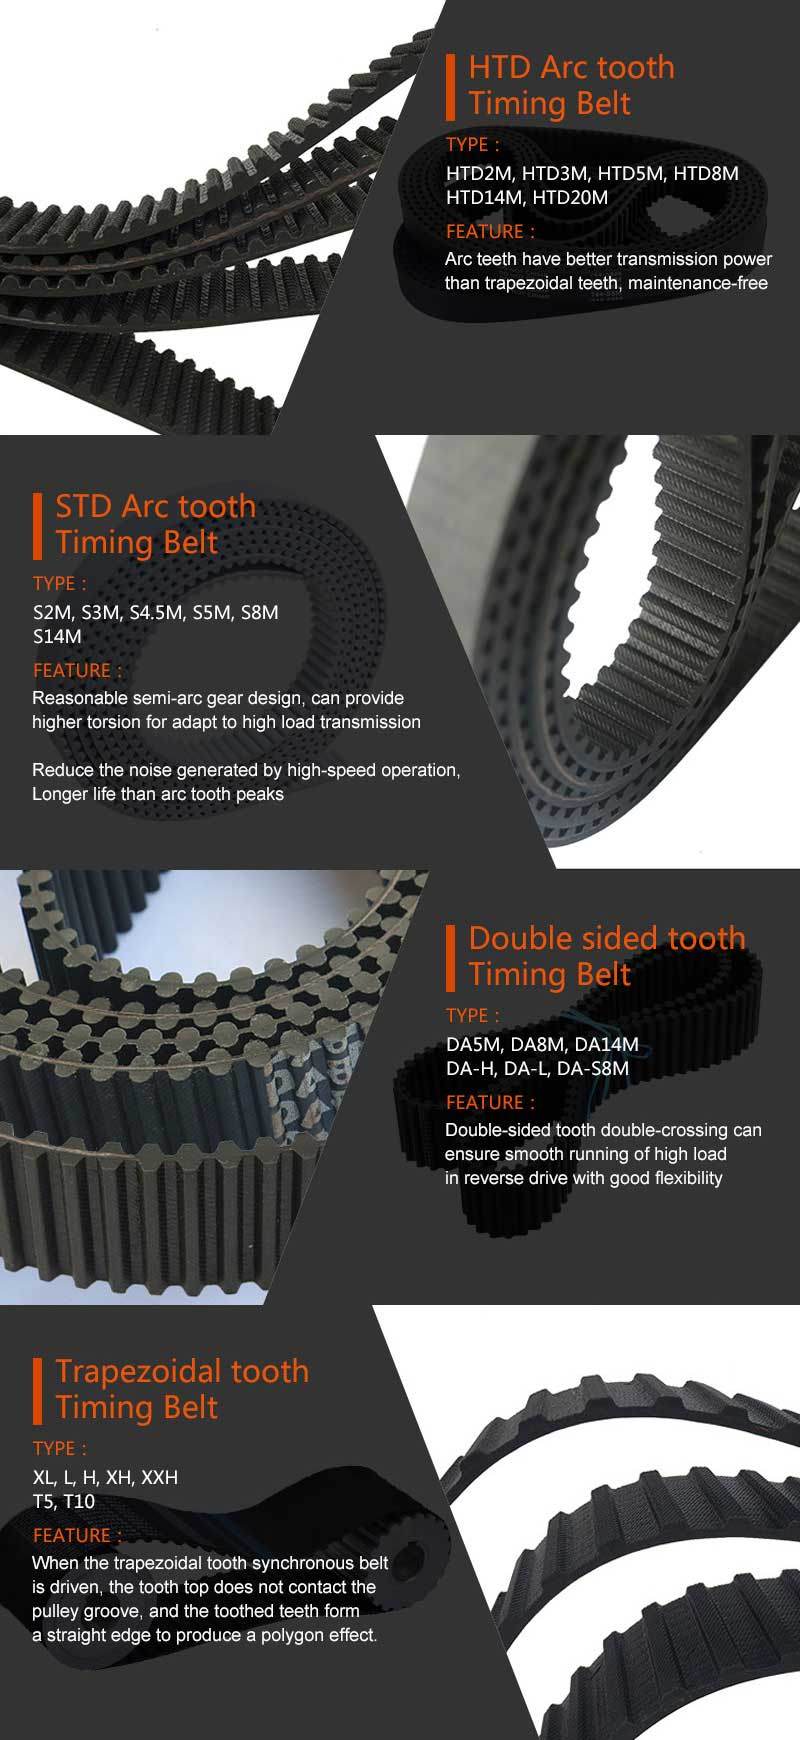 Wholesale Arc Toothed Htd Gt2 Gt3 Industrial Rubber Belts Timing